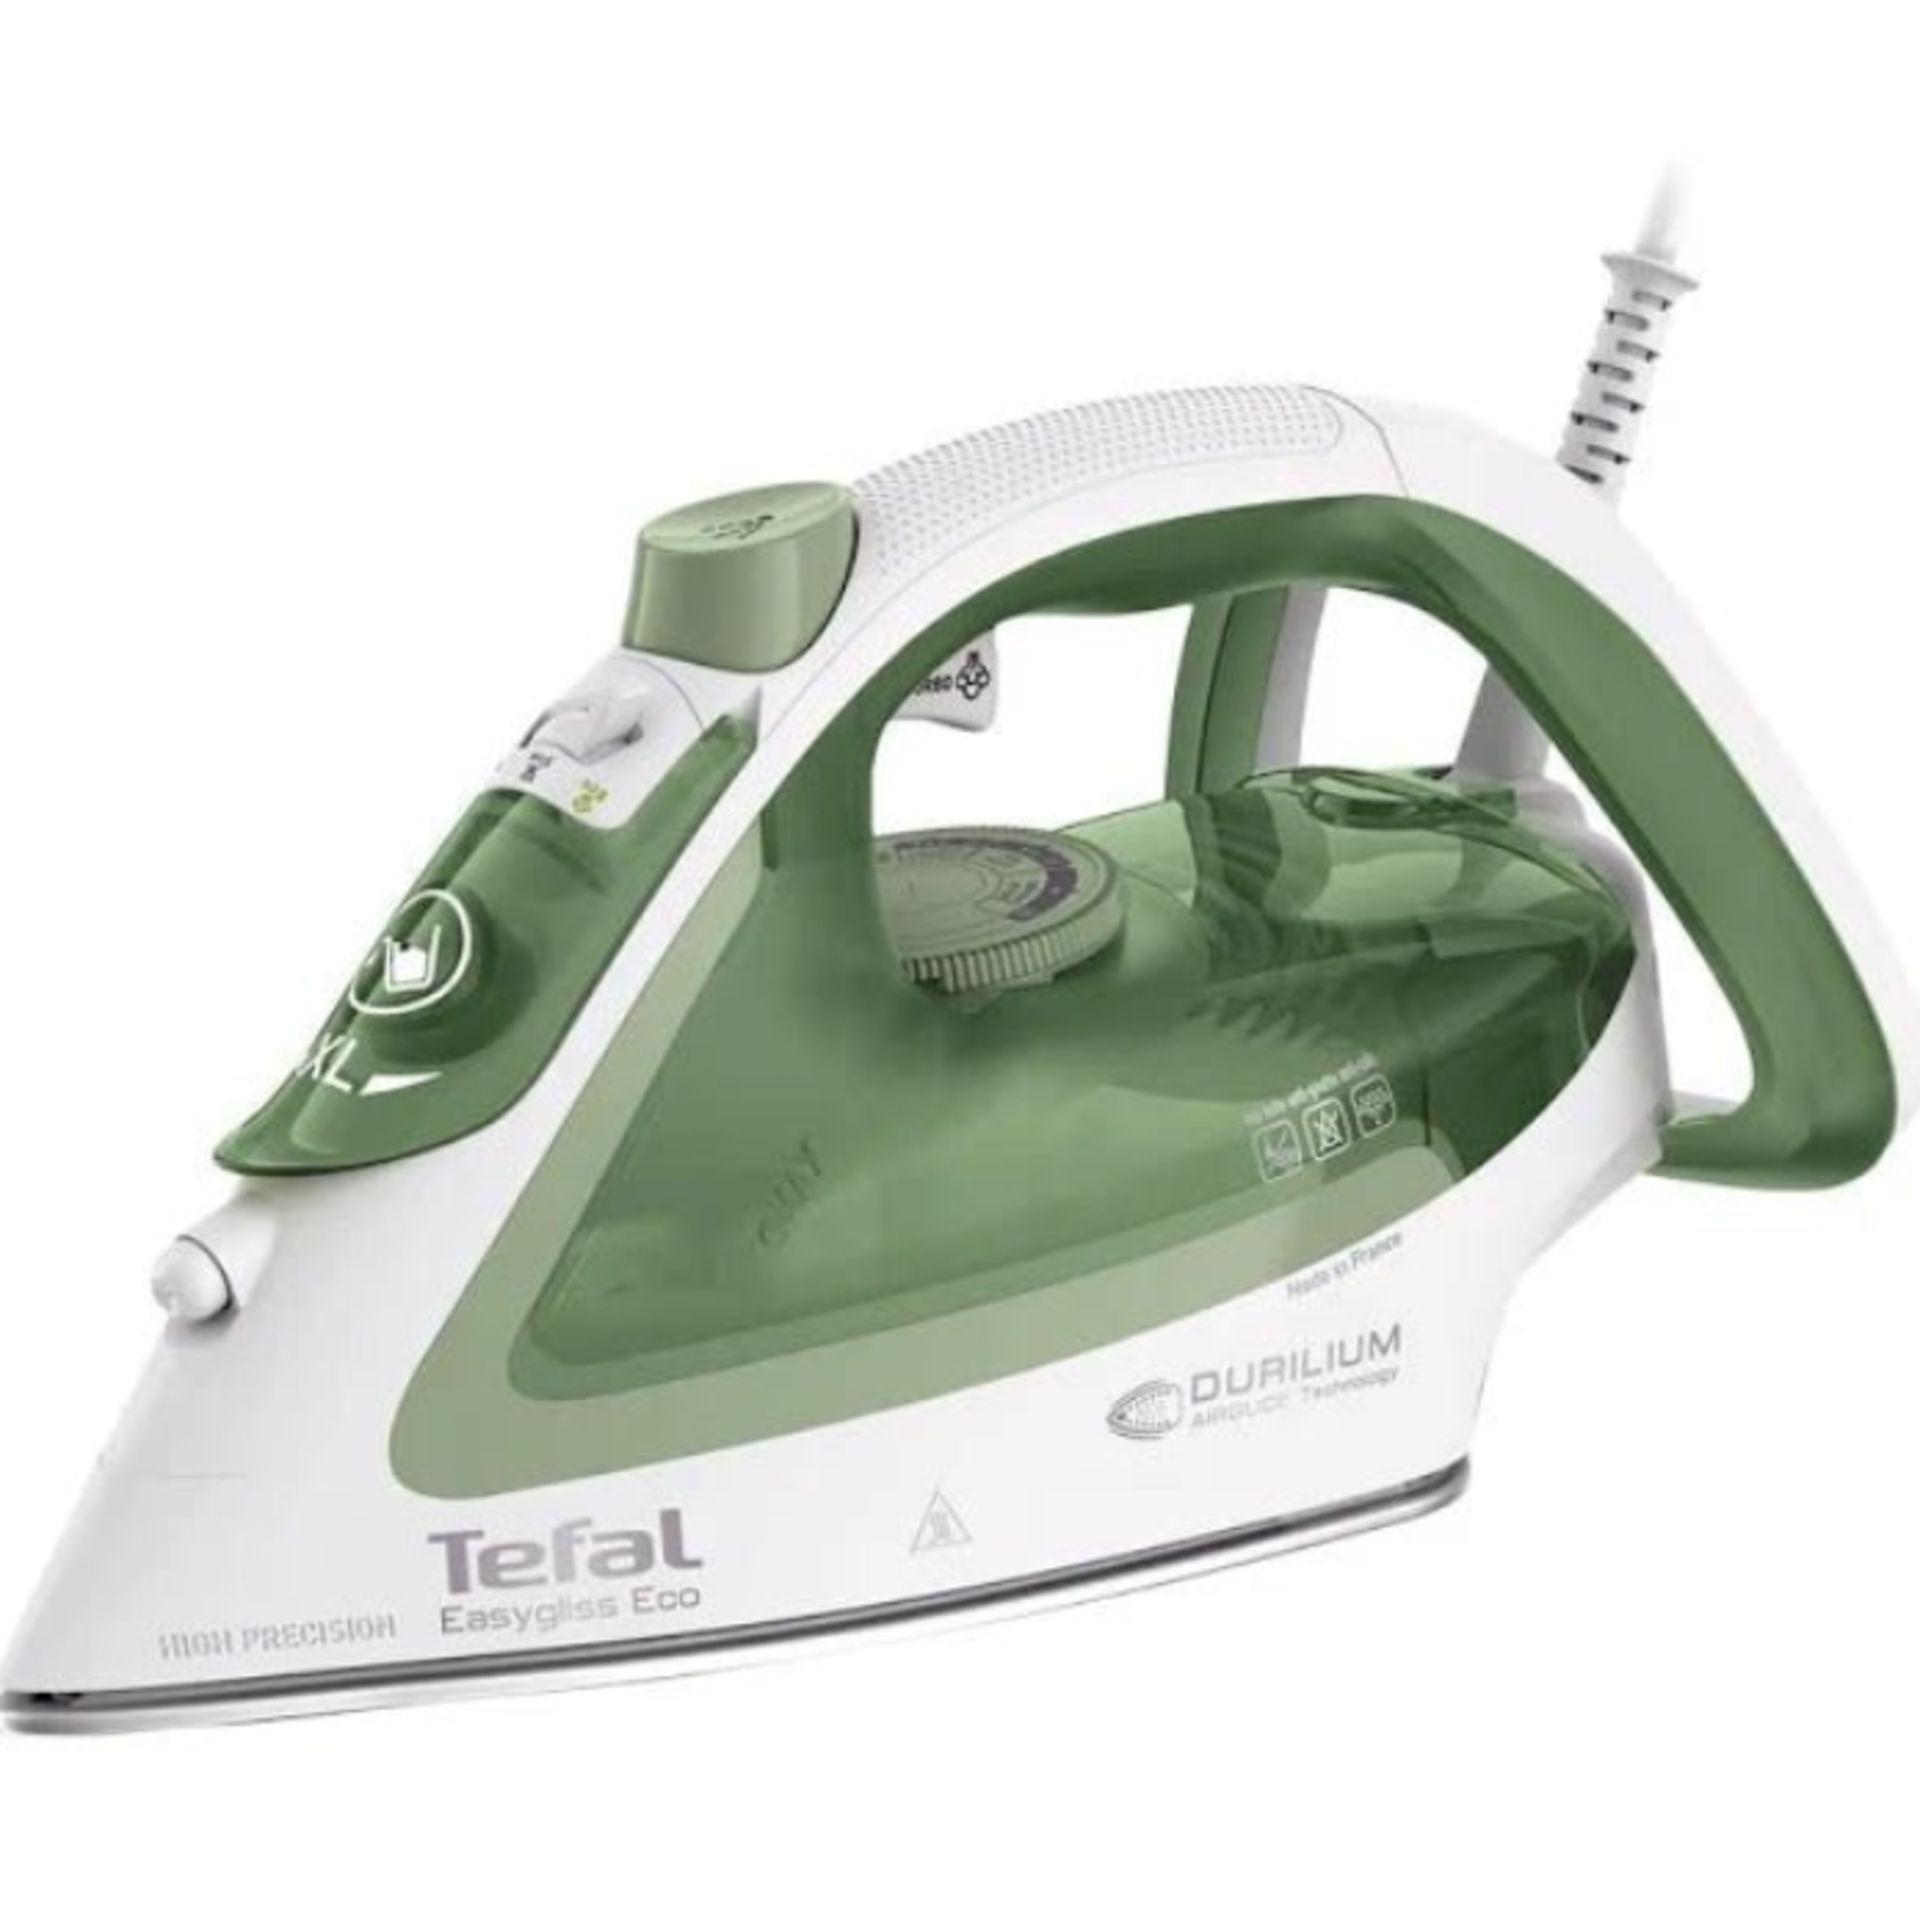 Tefal Easygliss Eco FV5781 Steam Iron White/Green RRP £59.99